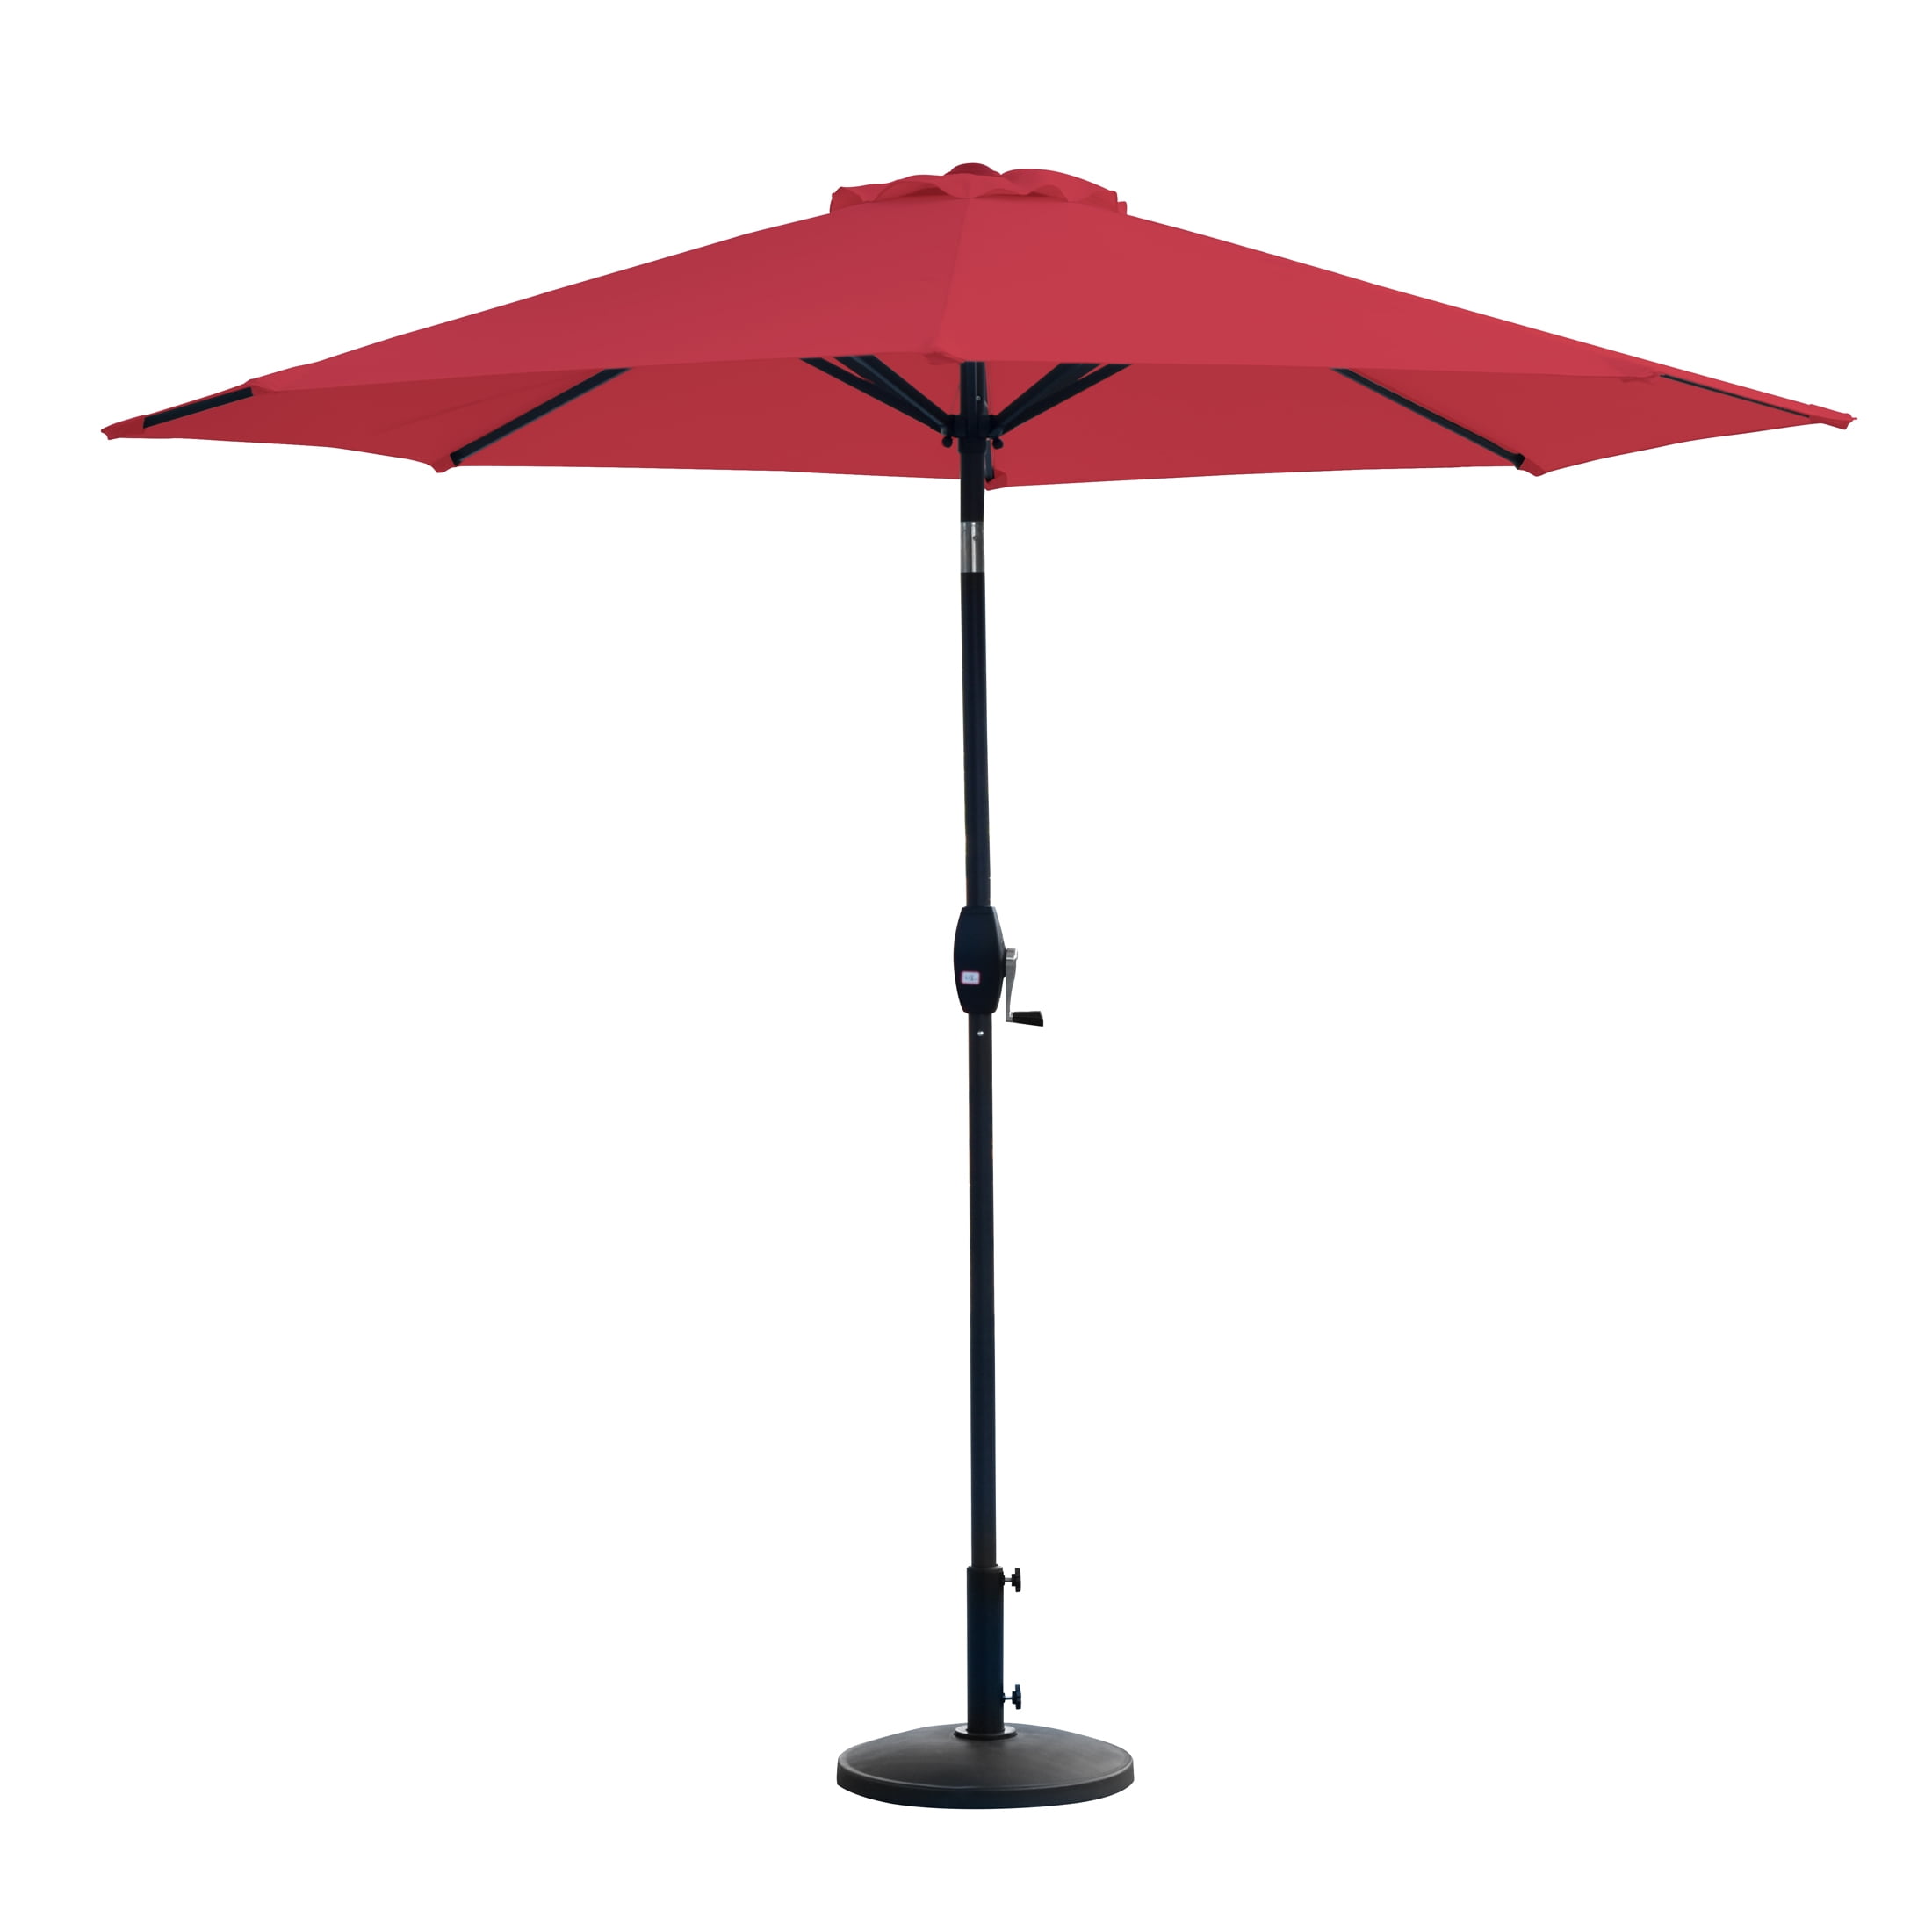 Details about   Sunnyglade 9' Patio Umbrella Outdoor Table Umbrella with 8 Sturdy Ribs 